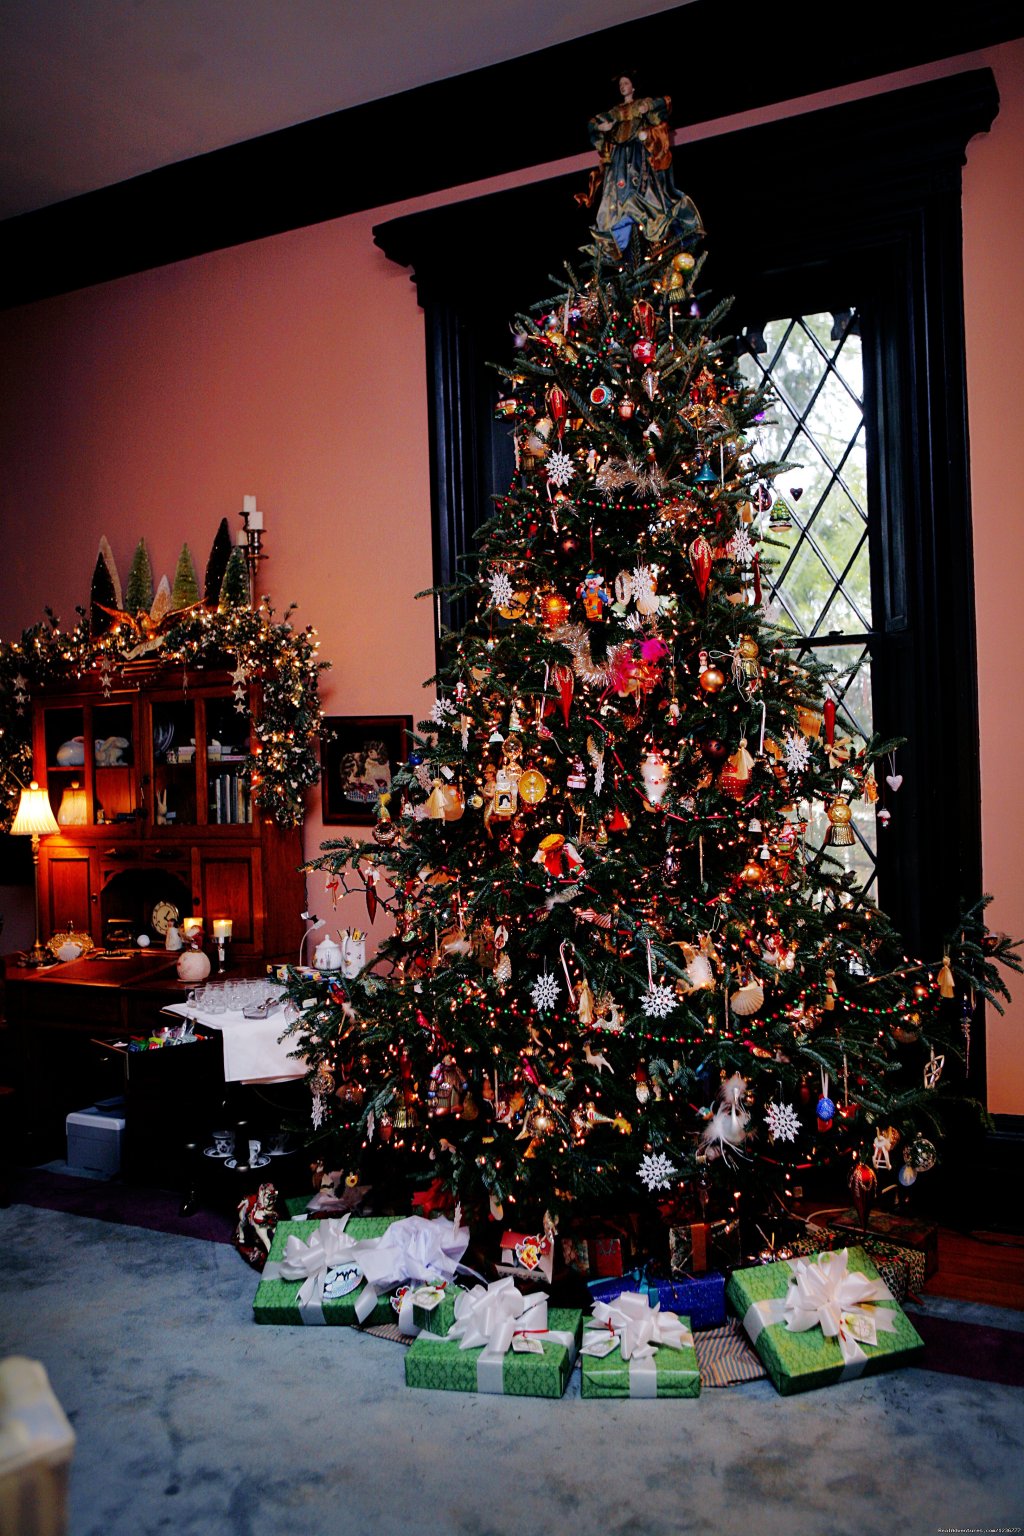 Christmas at the Inn | Inn at Woodhaven a Romantic Bed and Breakfast i | Image #6/10 | 